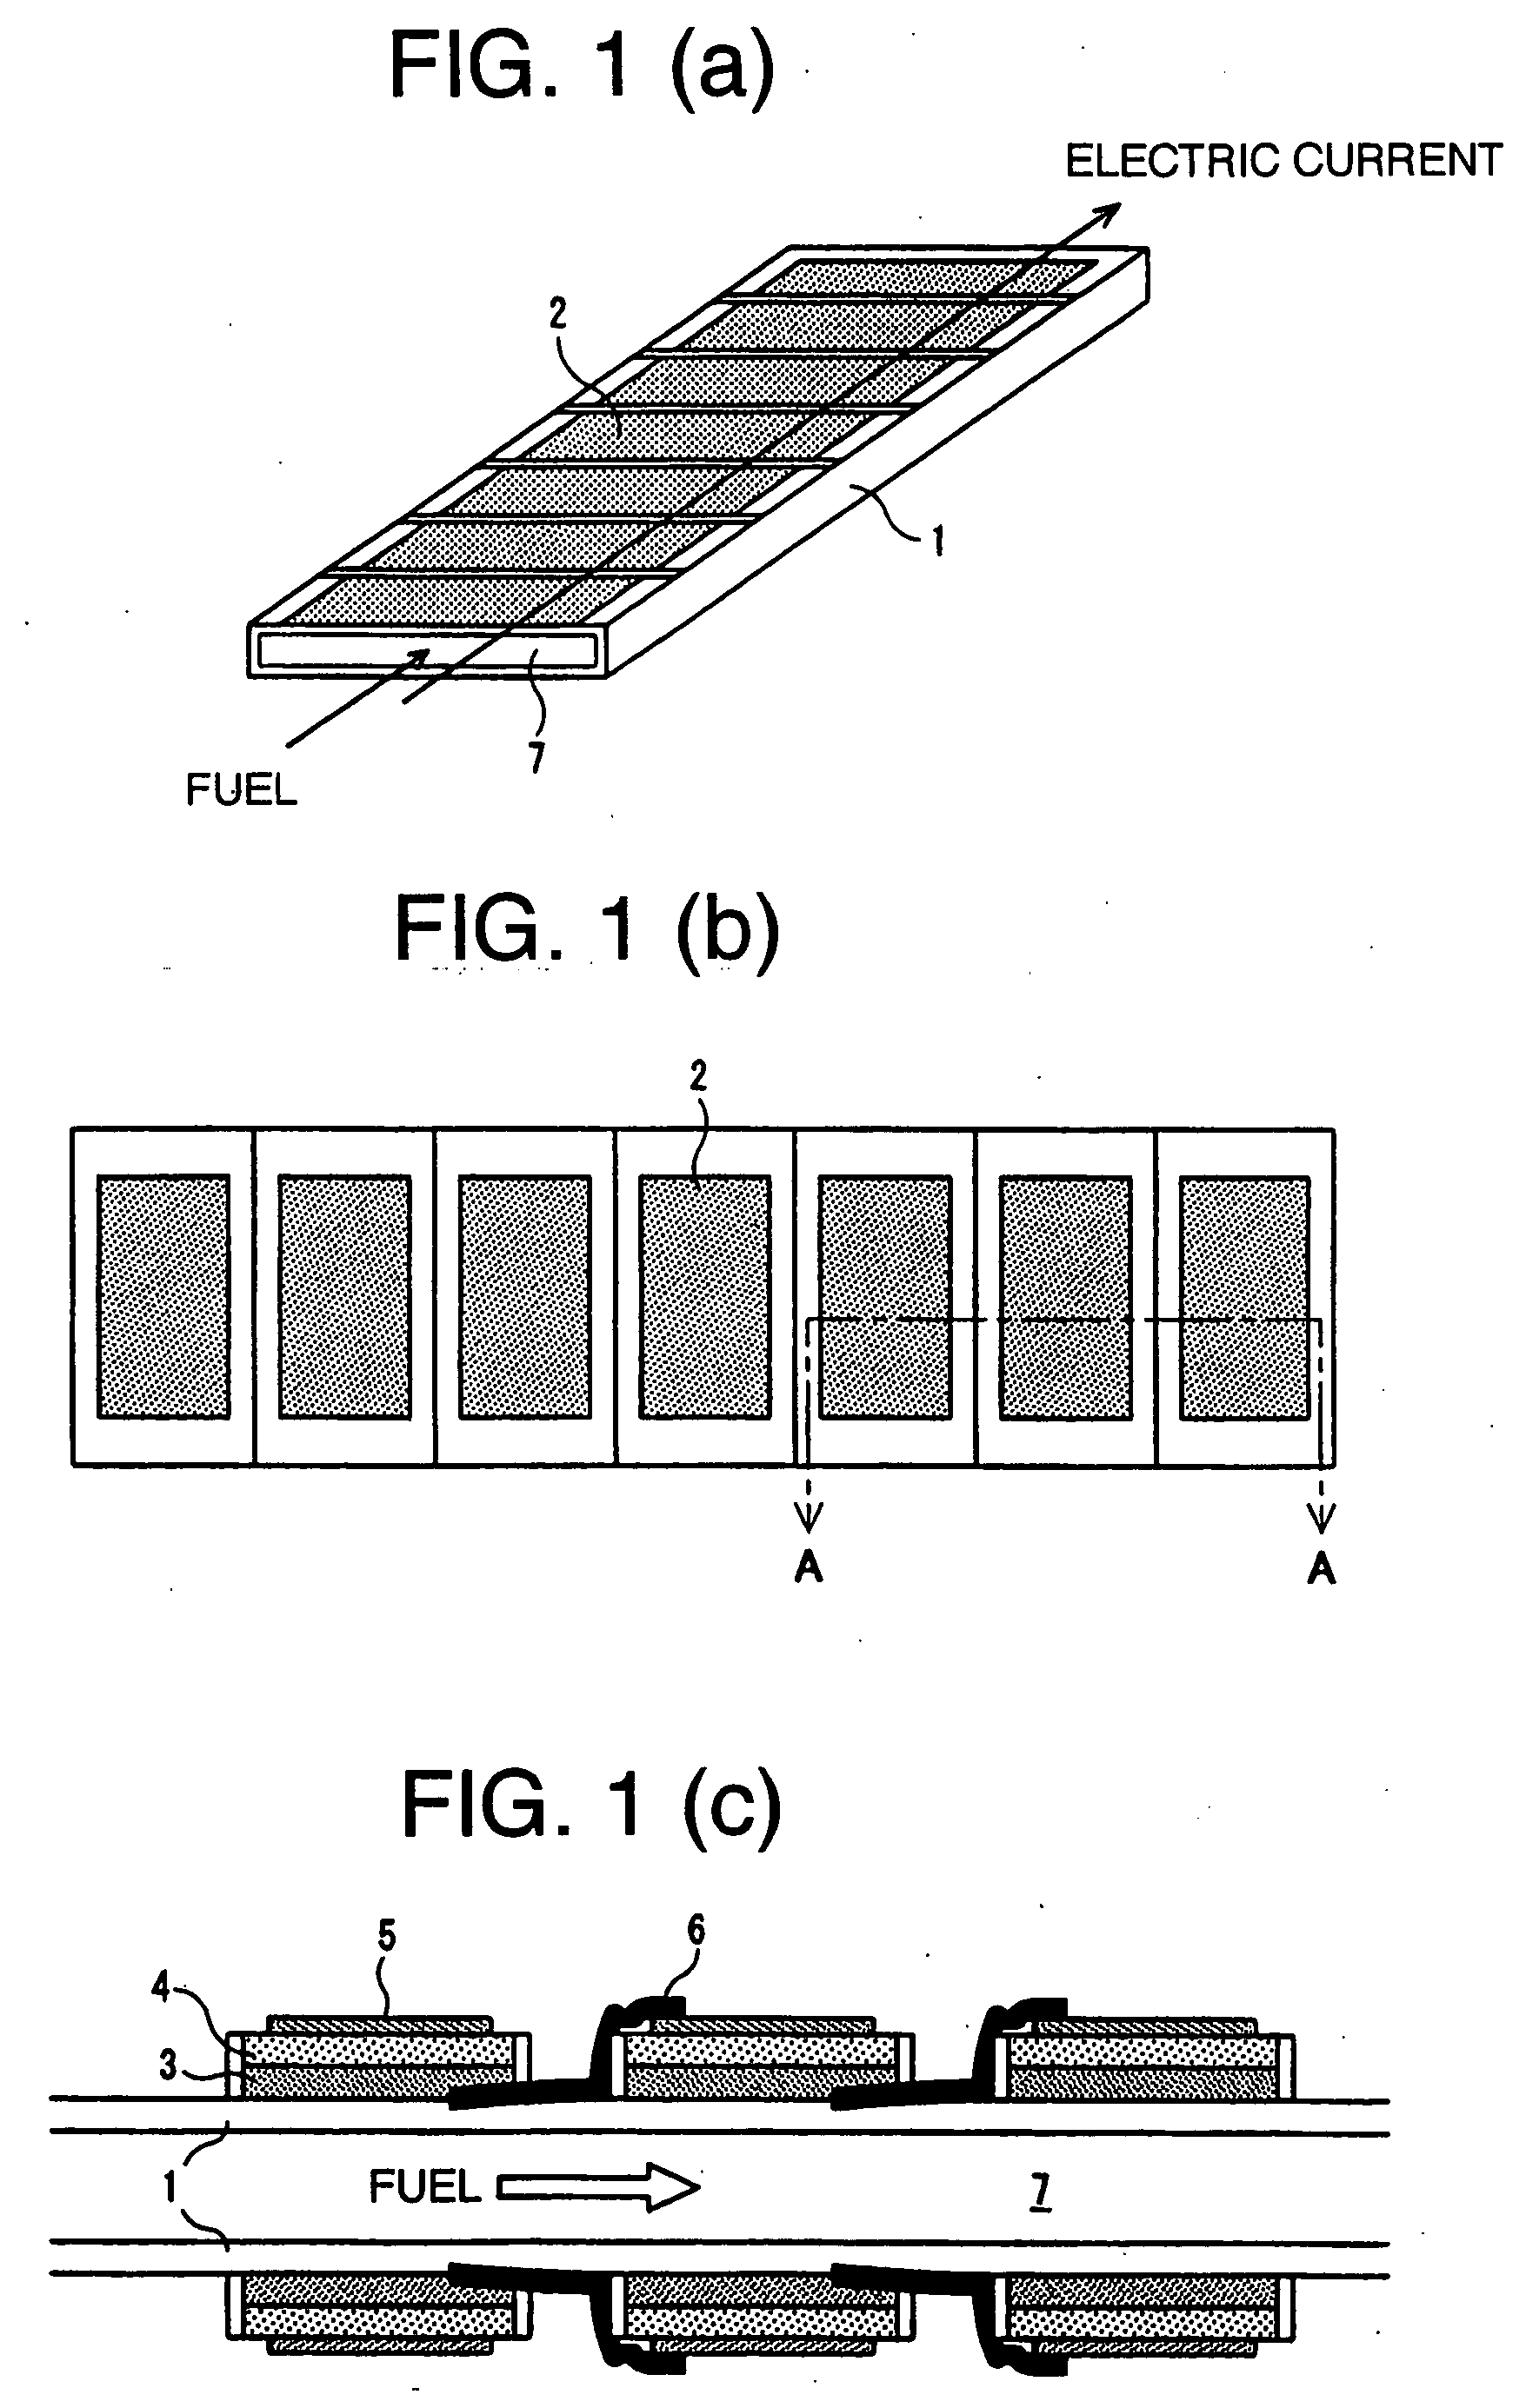 Solid-oxide shaped fuel cell module